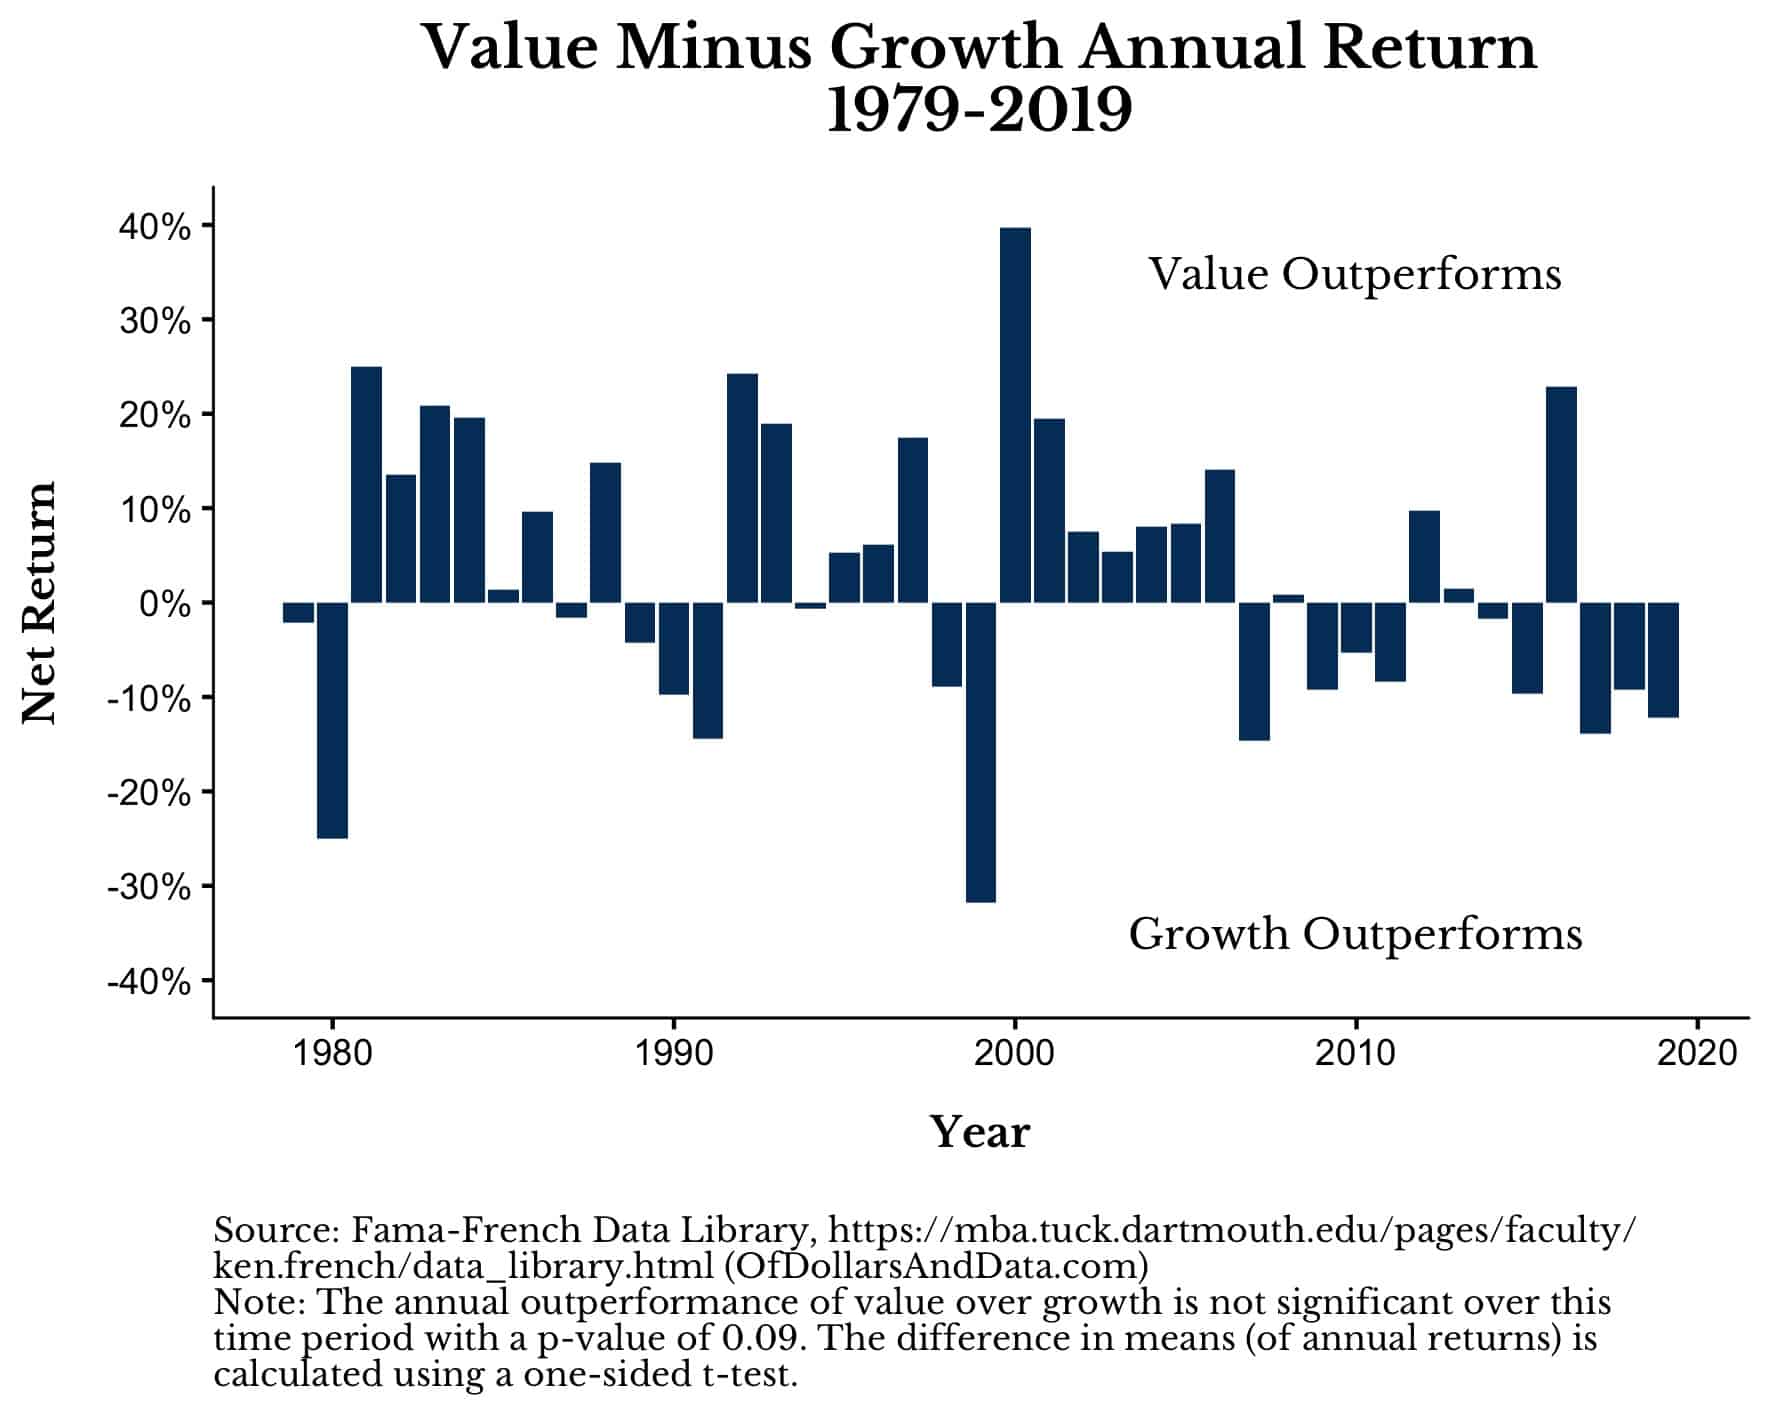 Value minus growth annual returns 1979-2019, using Fama-French definition of value